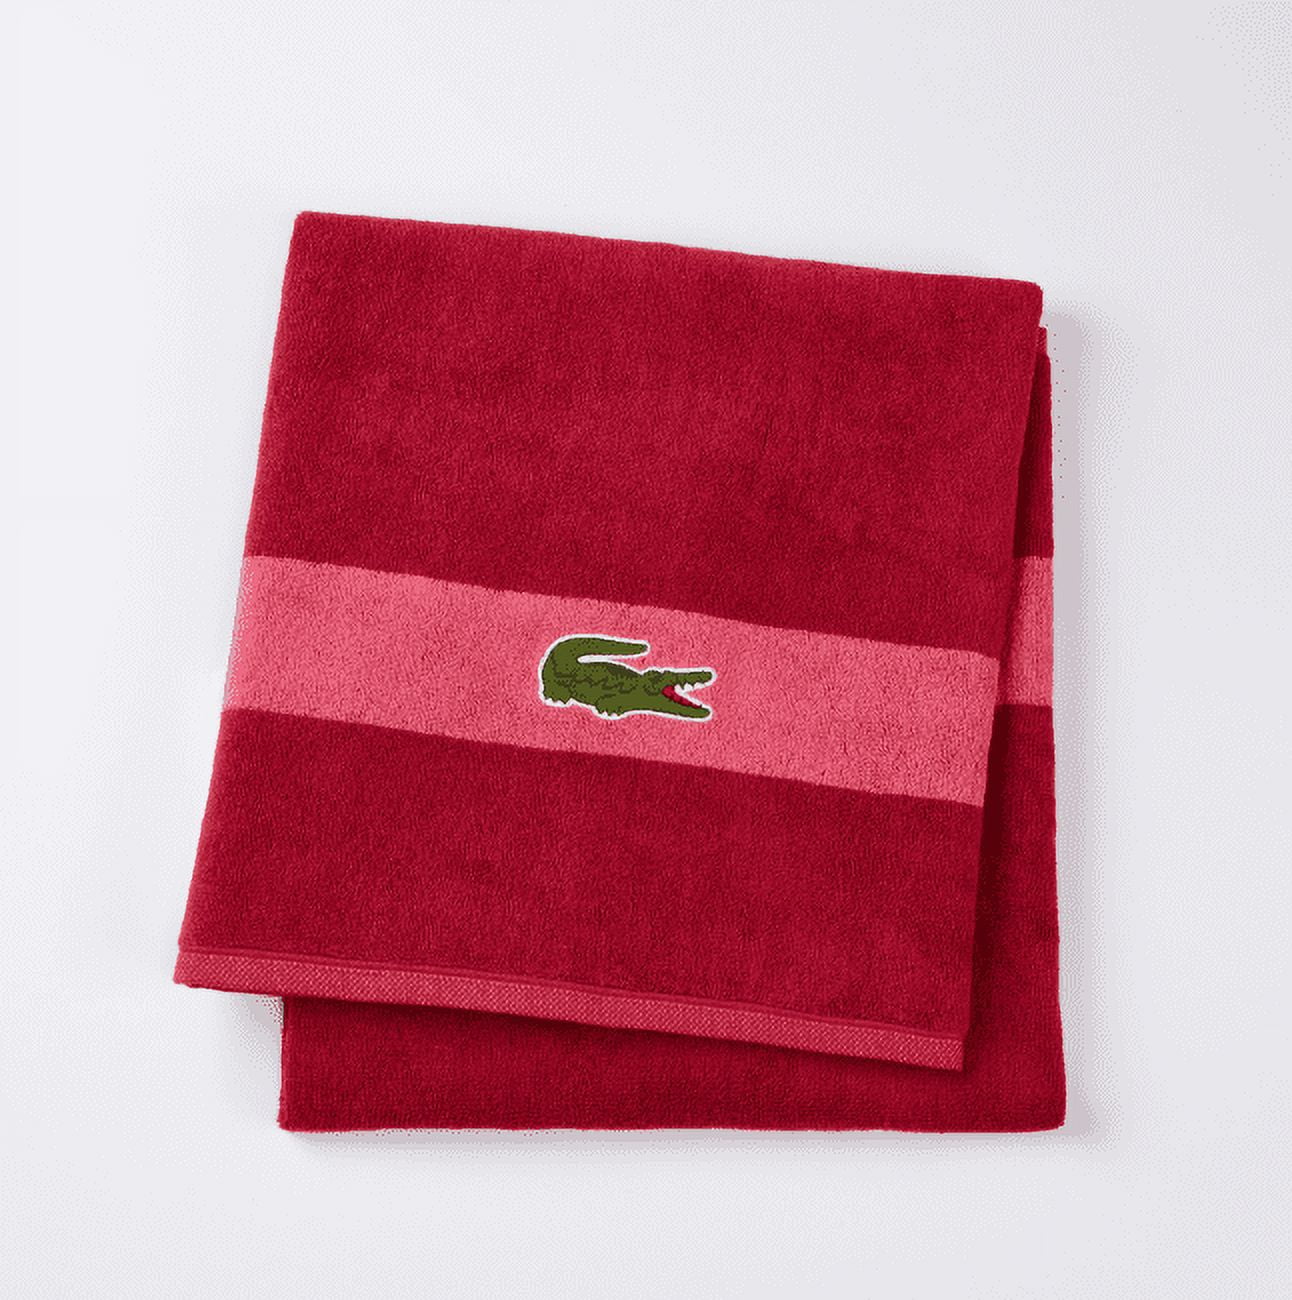 Lacoste Lacoste Towel Made In Japan Embroidery Logo